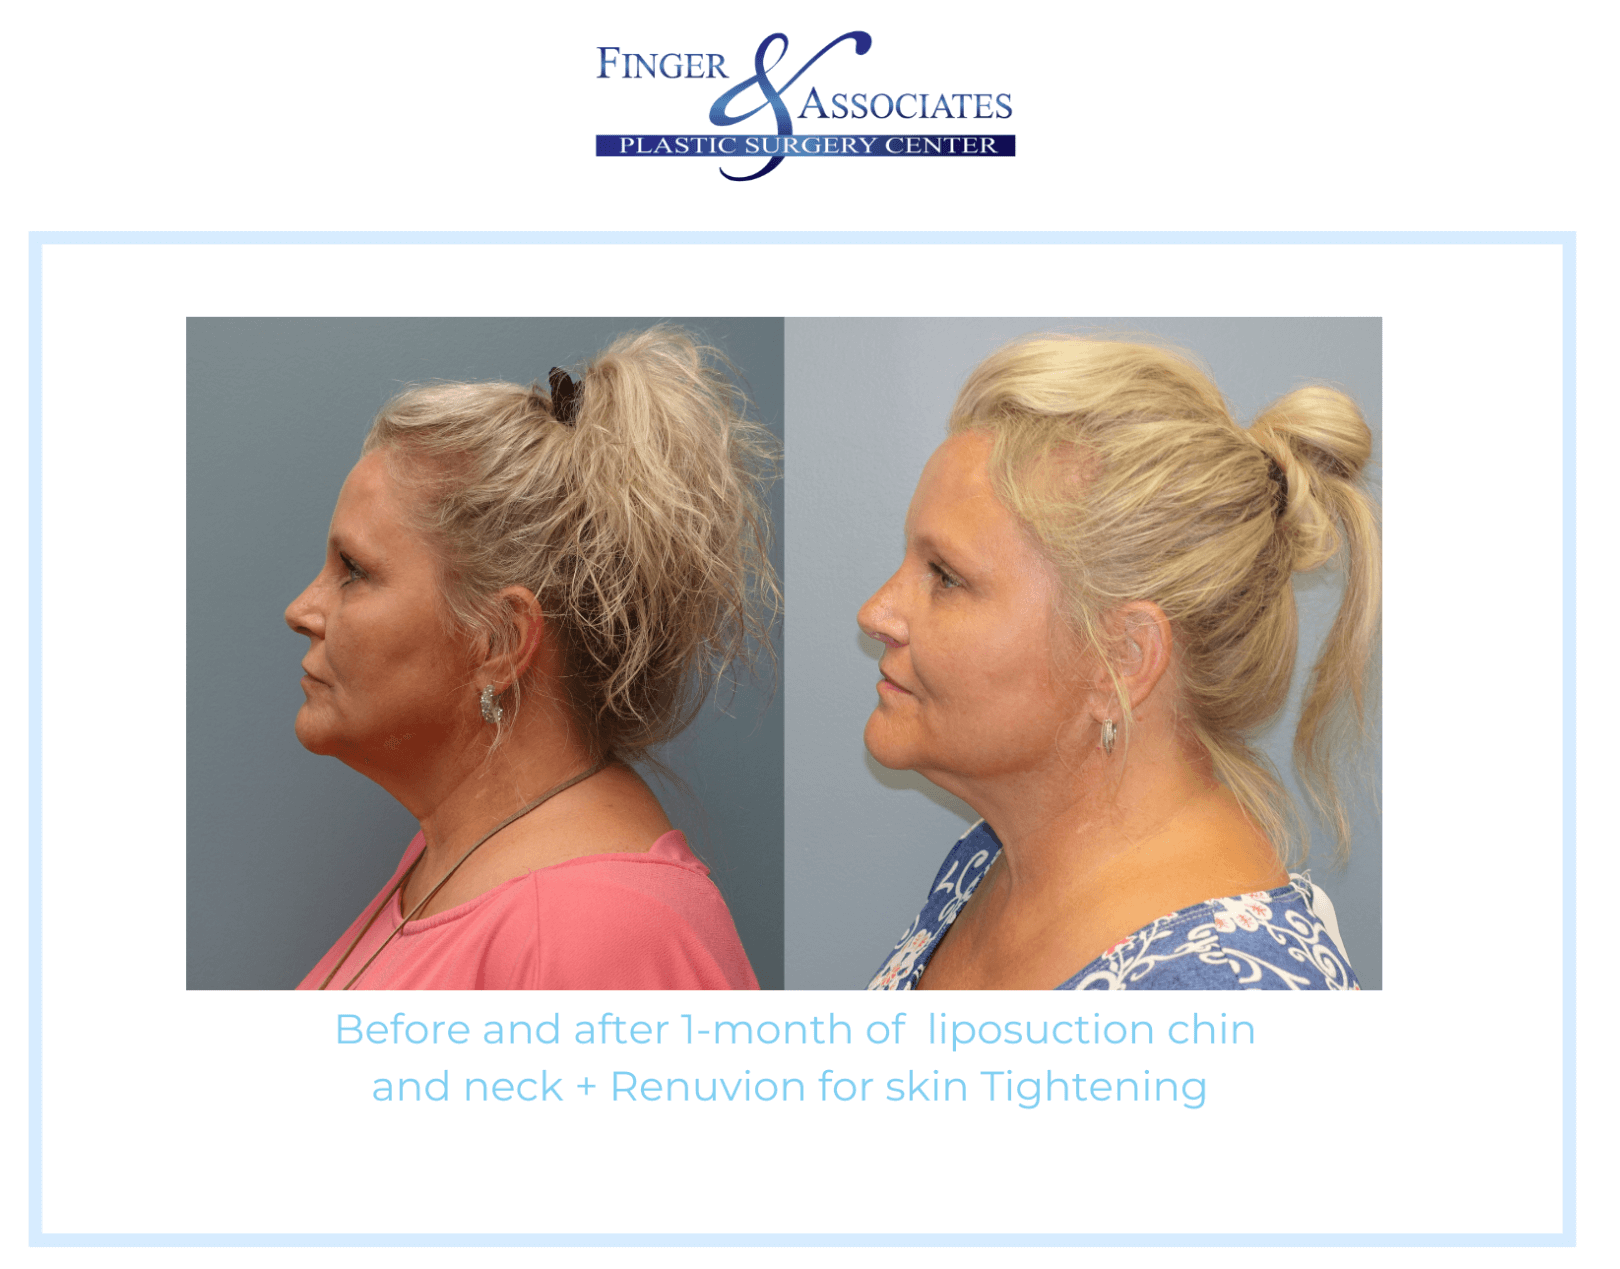 Before and After Liposuction Chin and neck + Renuvion for Skin Tightening